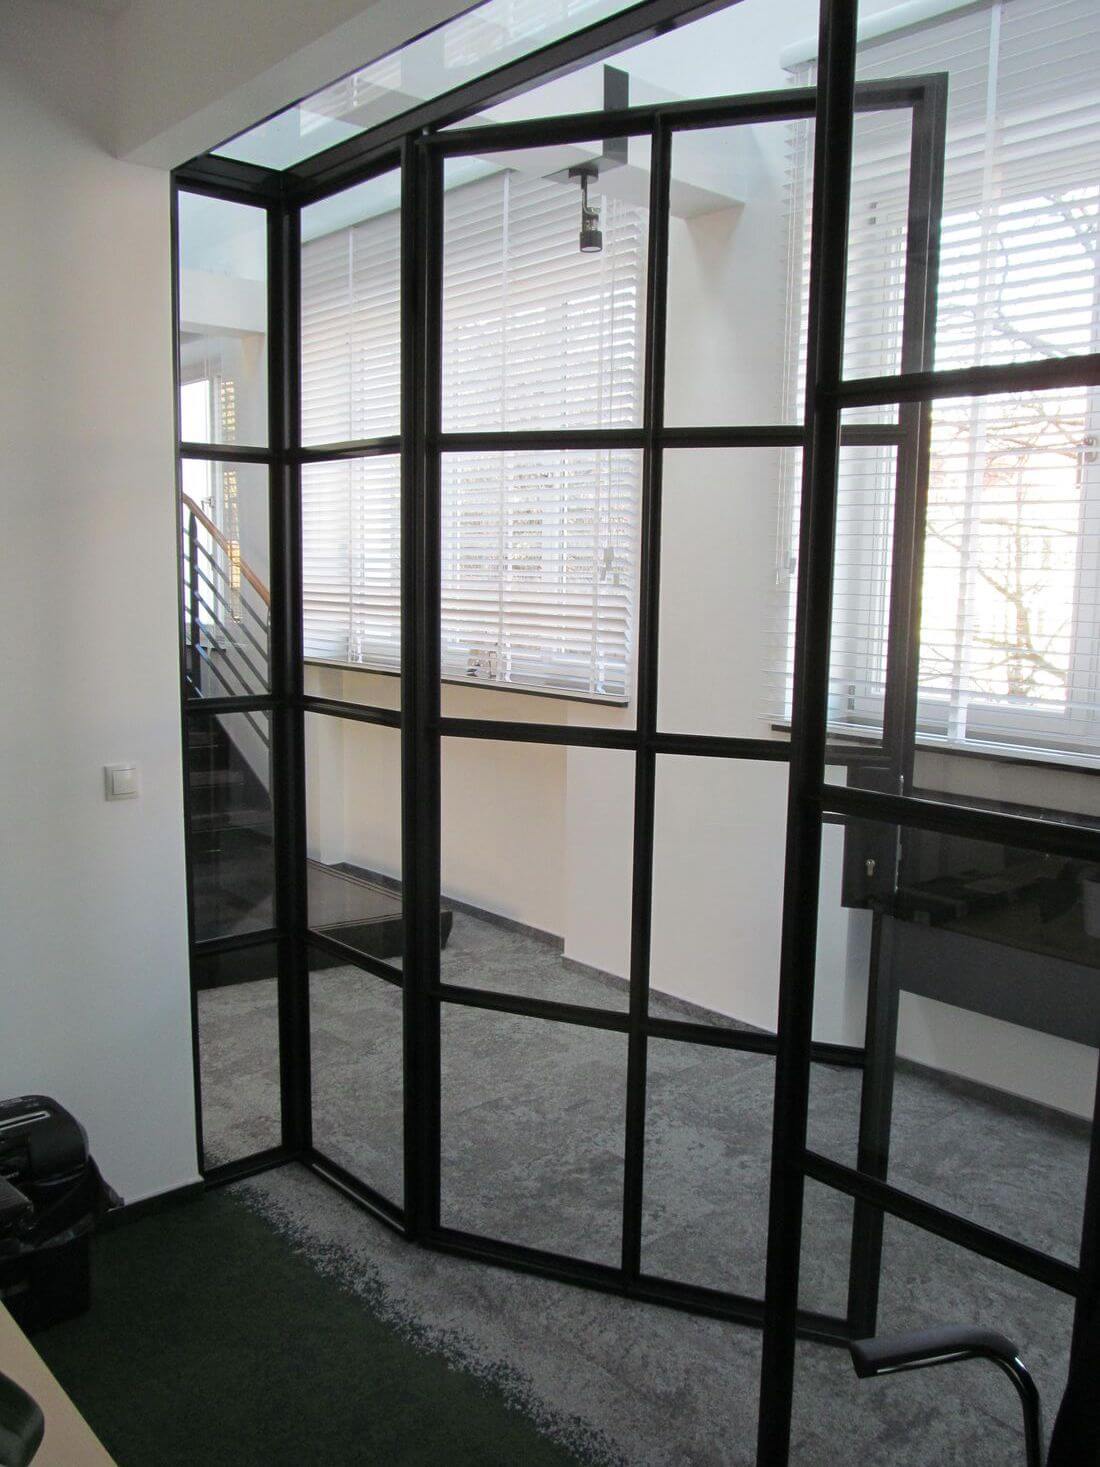 EIP Industrial Loft Door and Loft Wall System from reinforced glass and structural steel